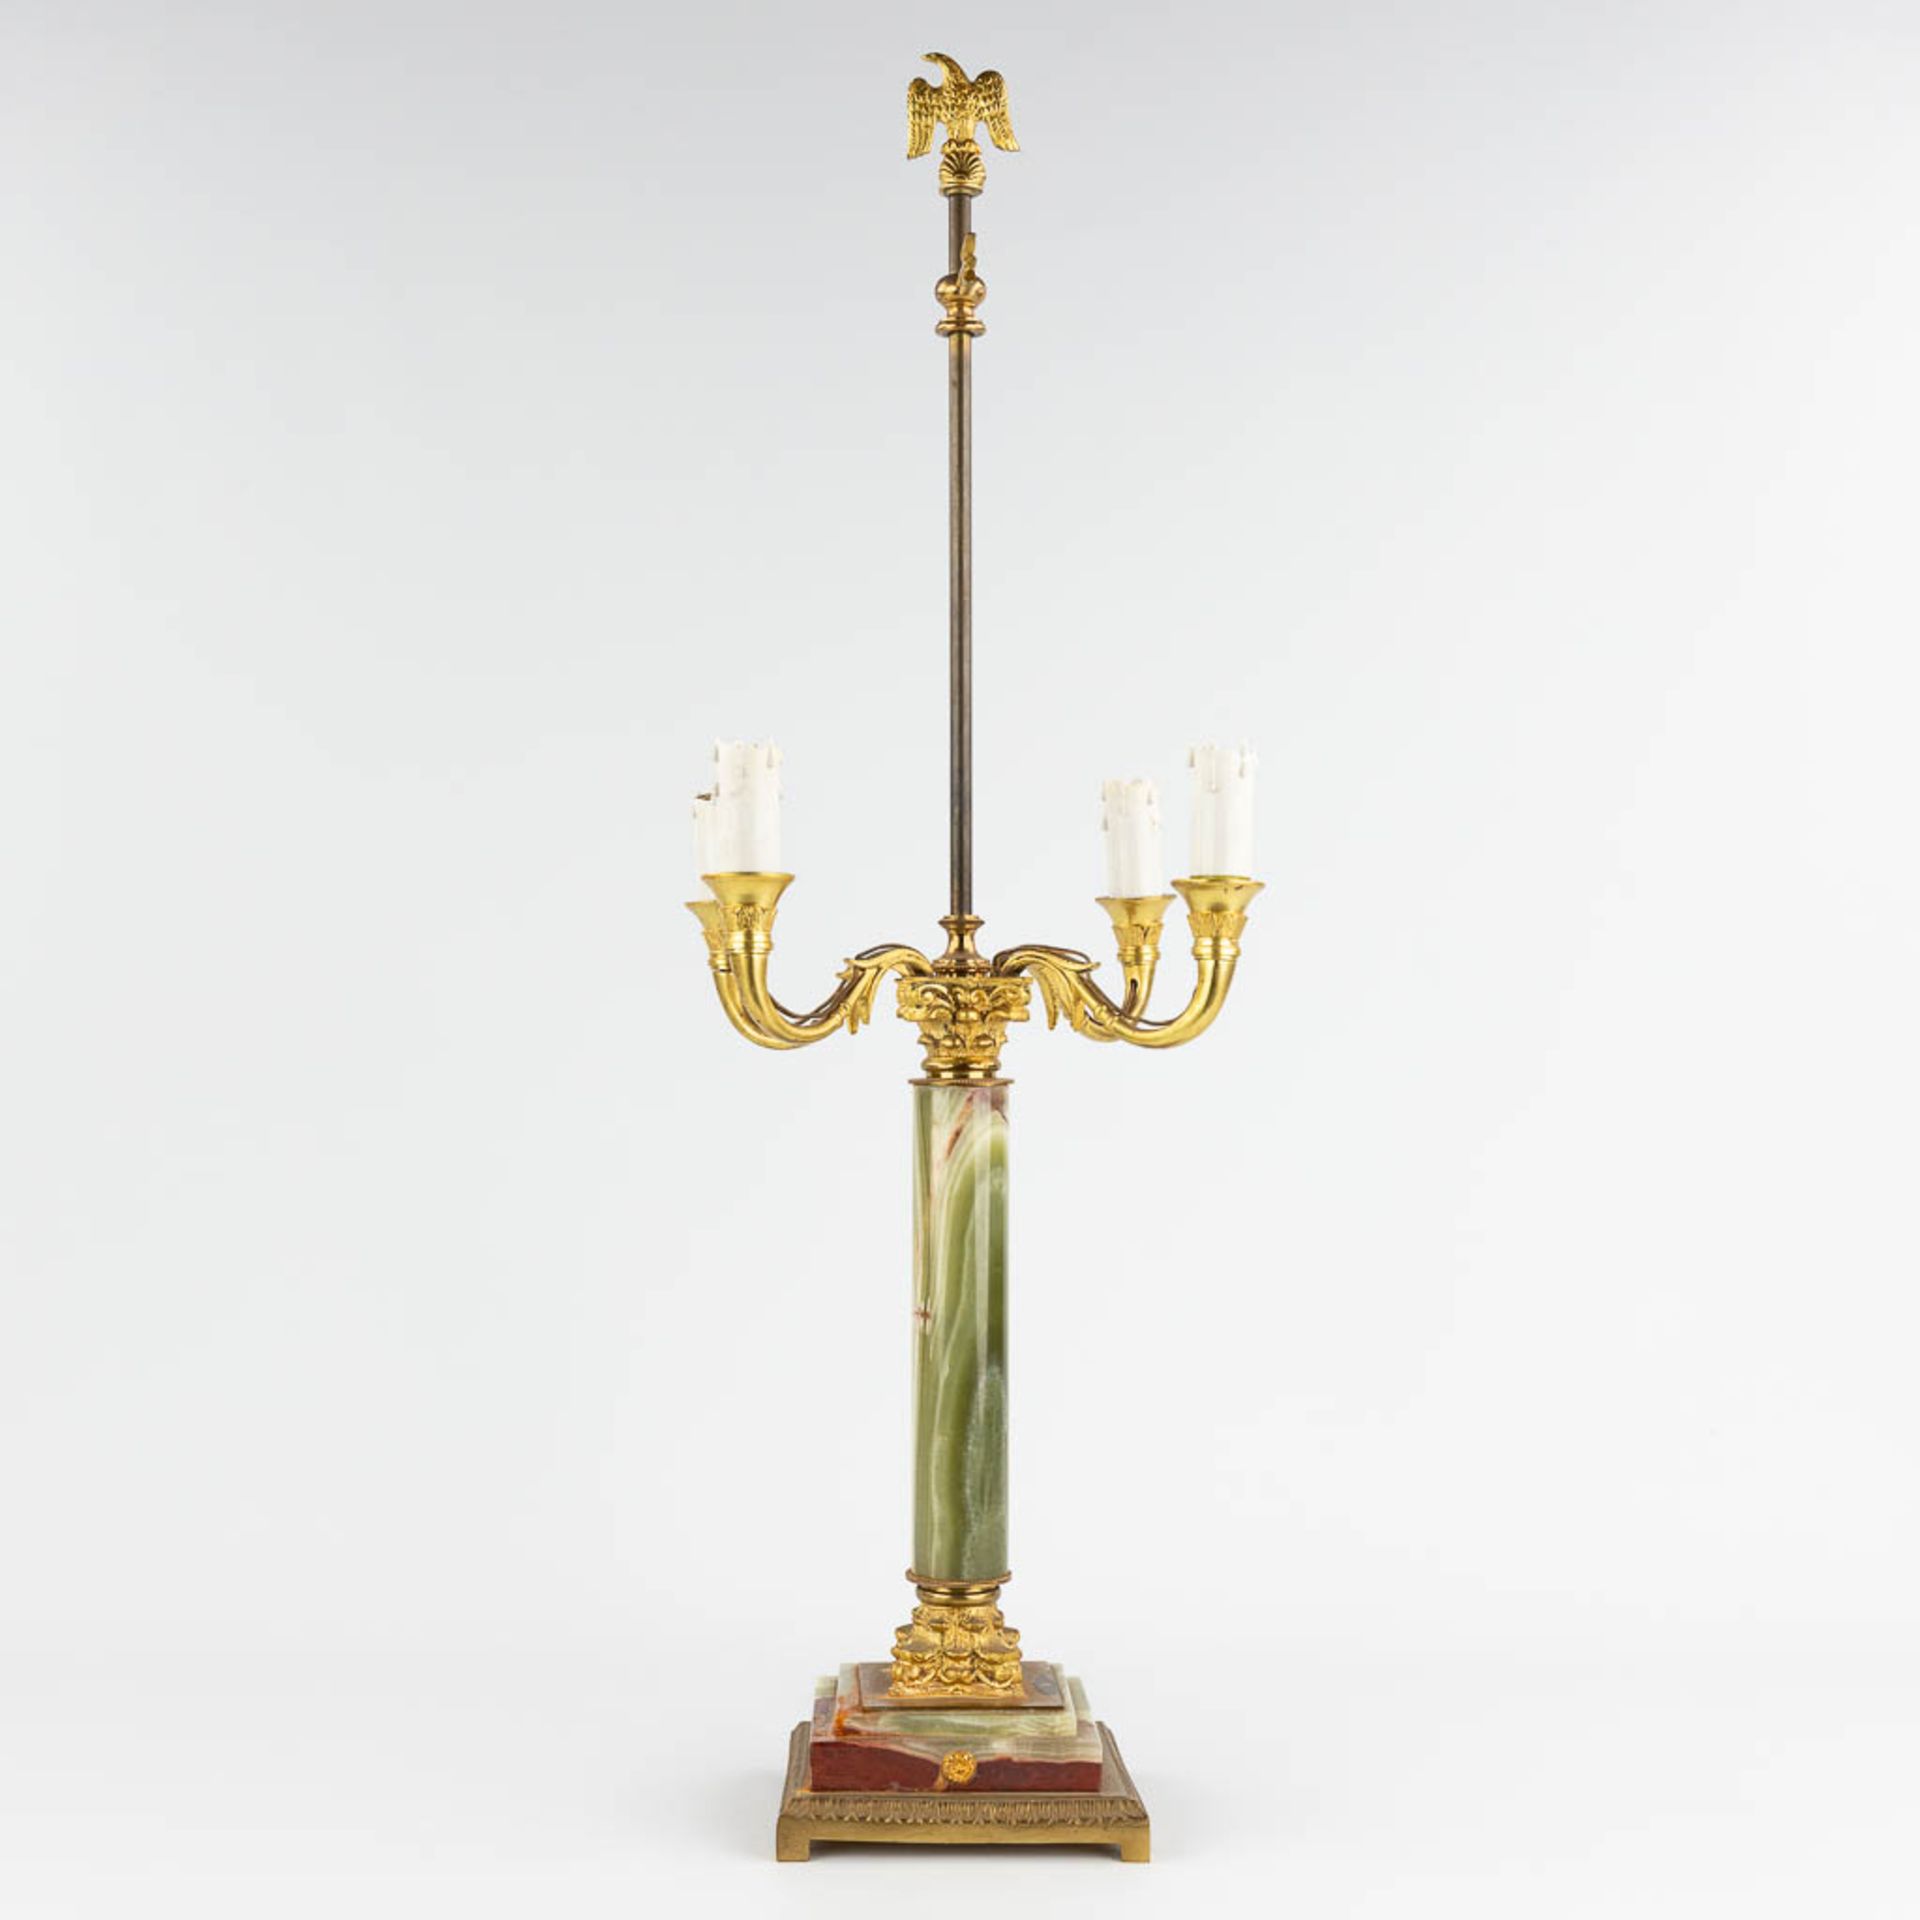 A table lamp, brass and onyx. 20th century. (L: 30 x W: 30 x H: 77 cm)